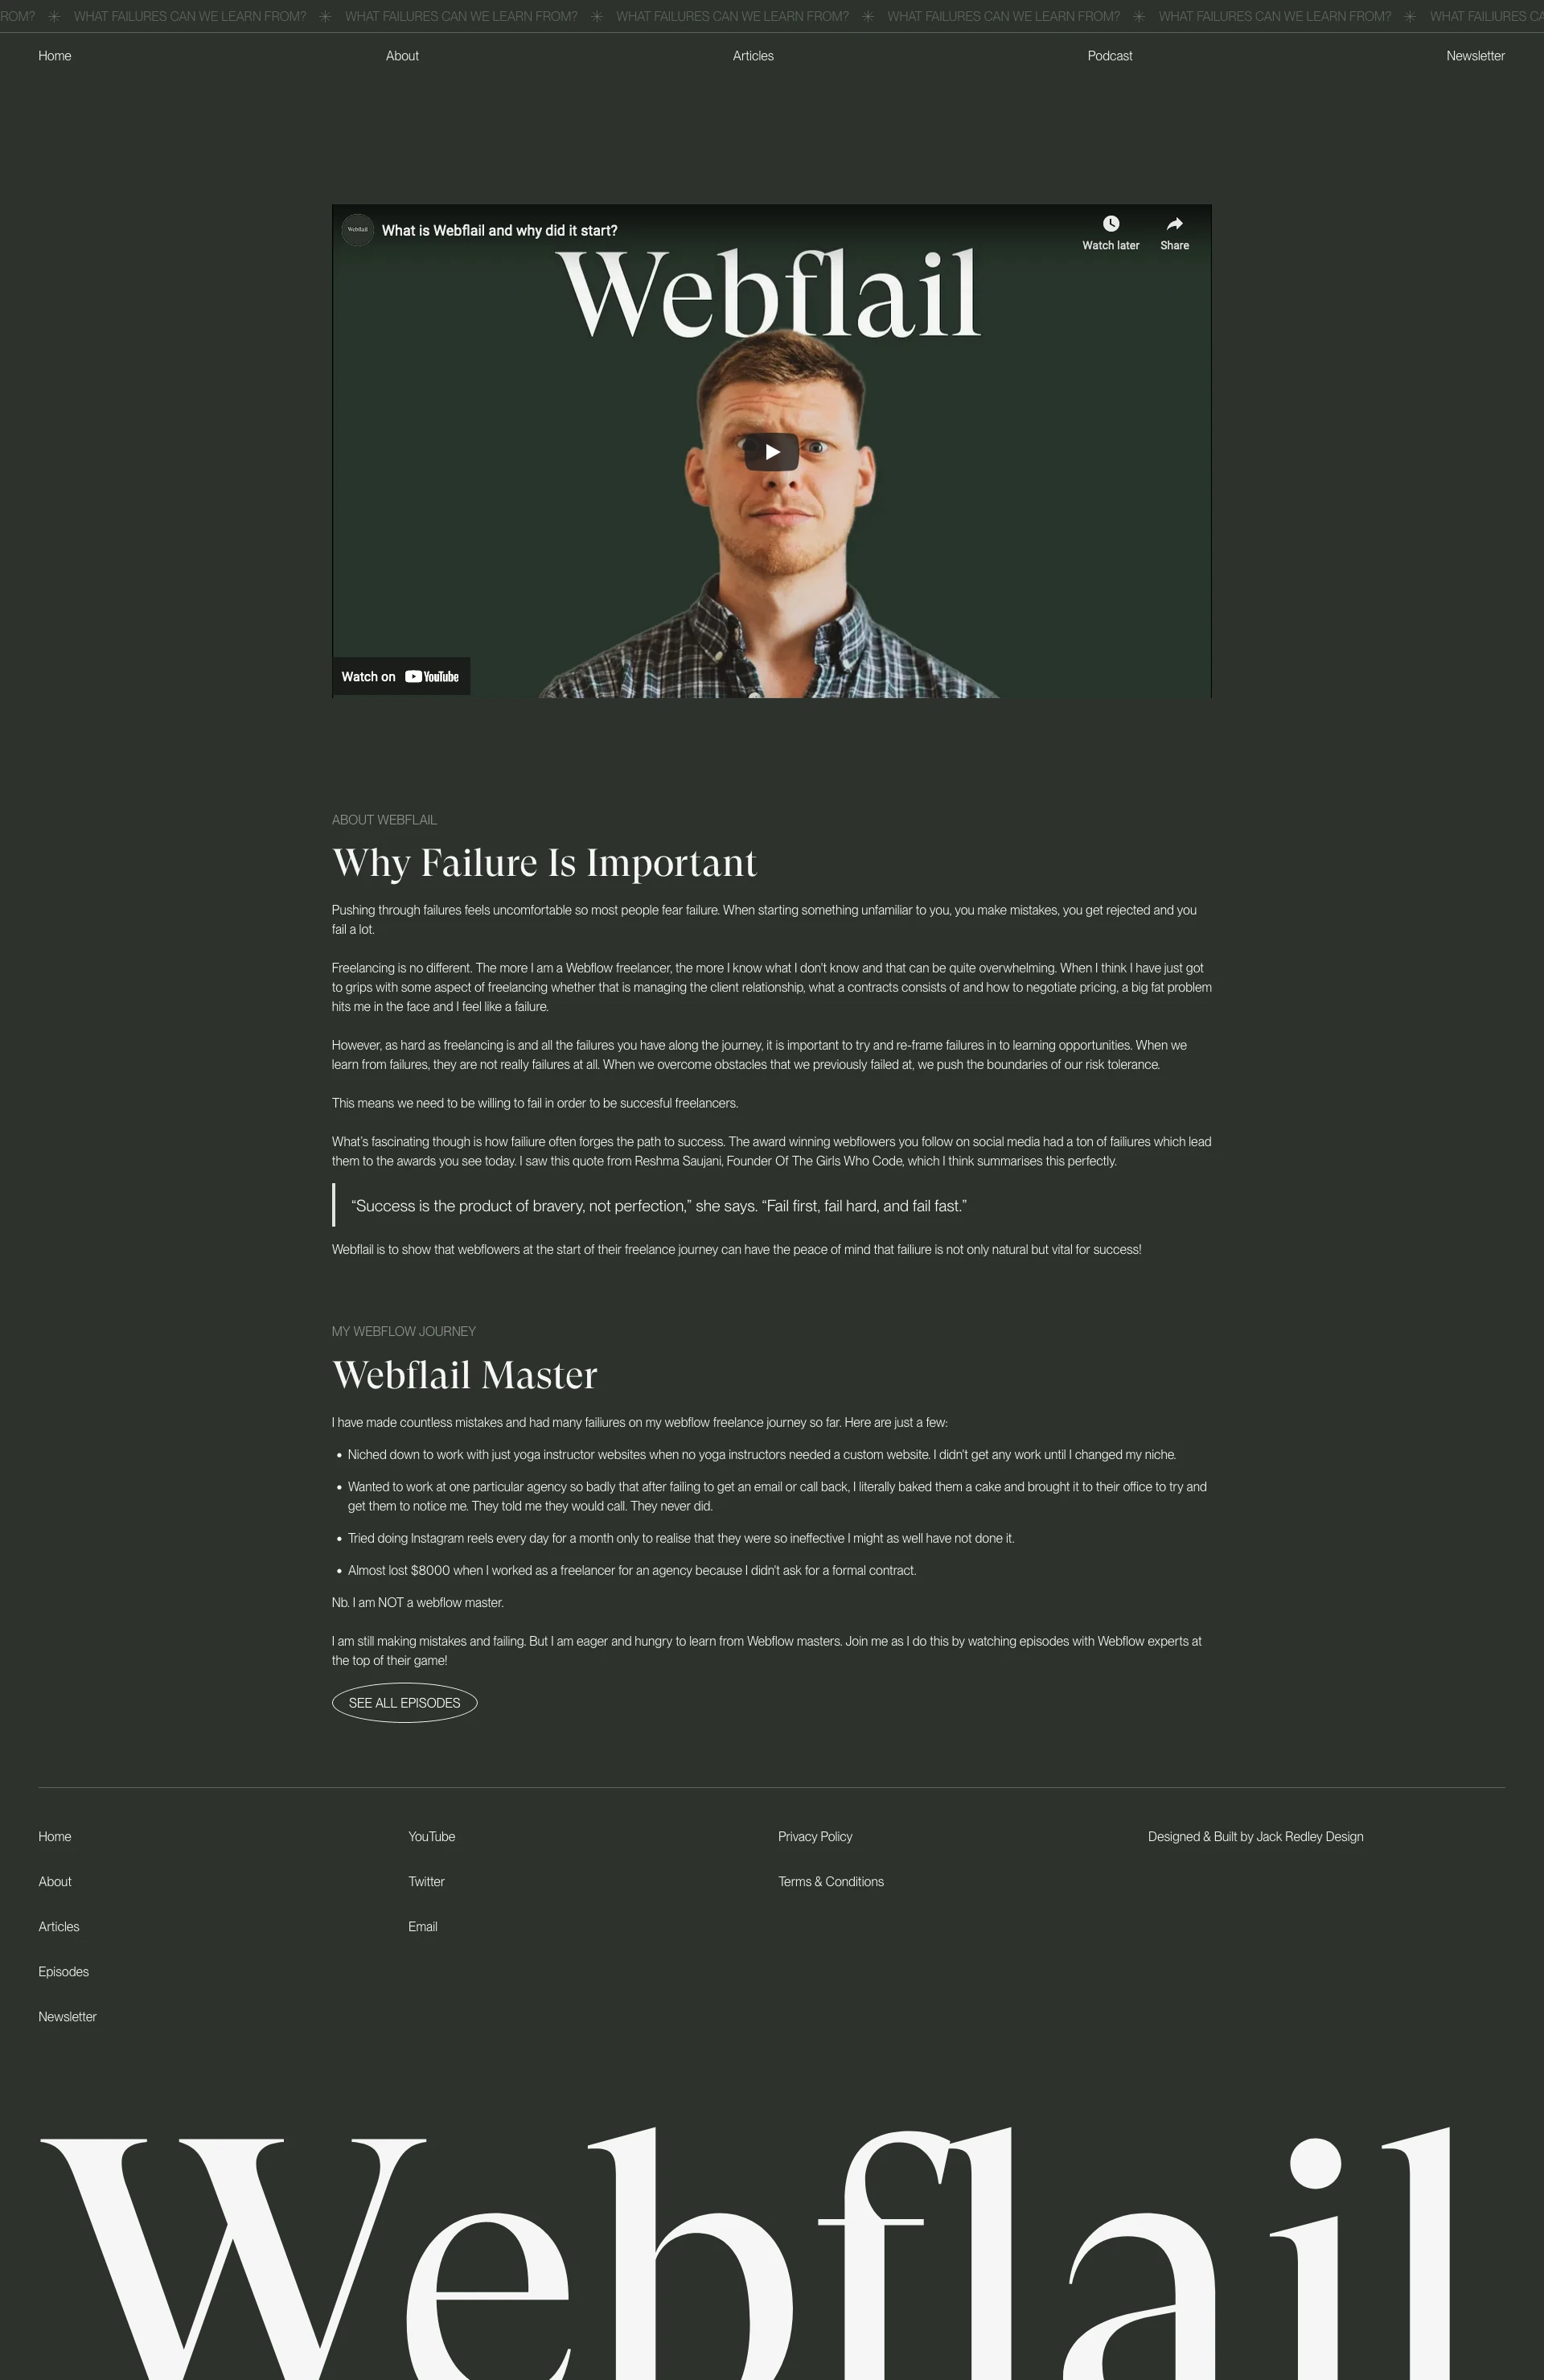 Webflail Landing Page Example: Webflail is a Youtube channel and podcast focussed on helping freelance Webflowers at the start of their careers get to the next level. The concept involves interviewing Webflowers about their 3 biggest failures and what we can learn from them.